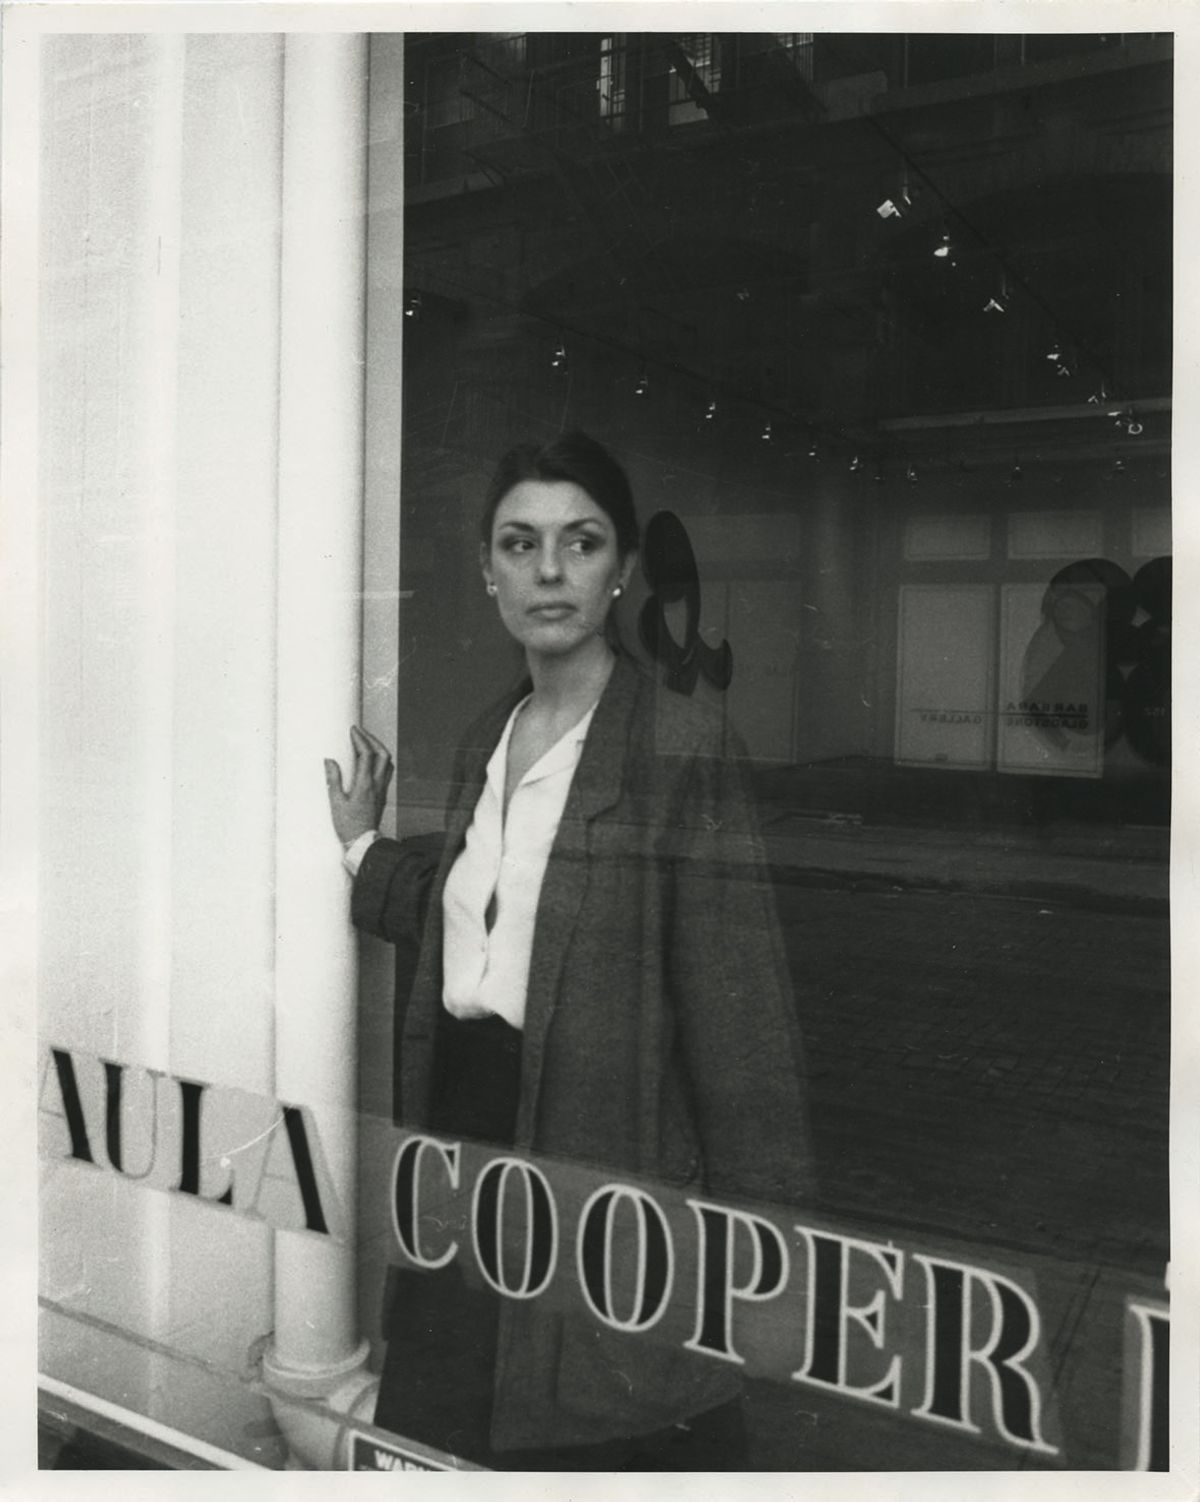 Paula Cooper at her gallery on Wooster Street, New York in 1983 Photo: Richard Leslie Schulman; courtesy of paula cooper gallery